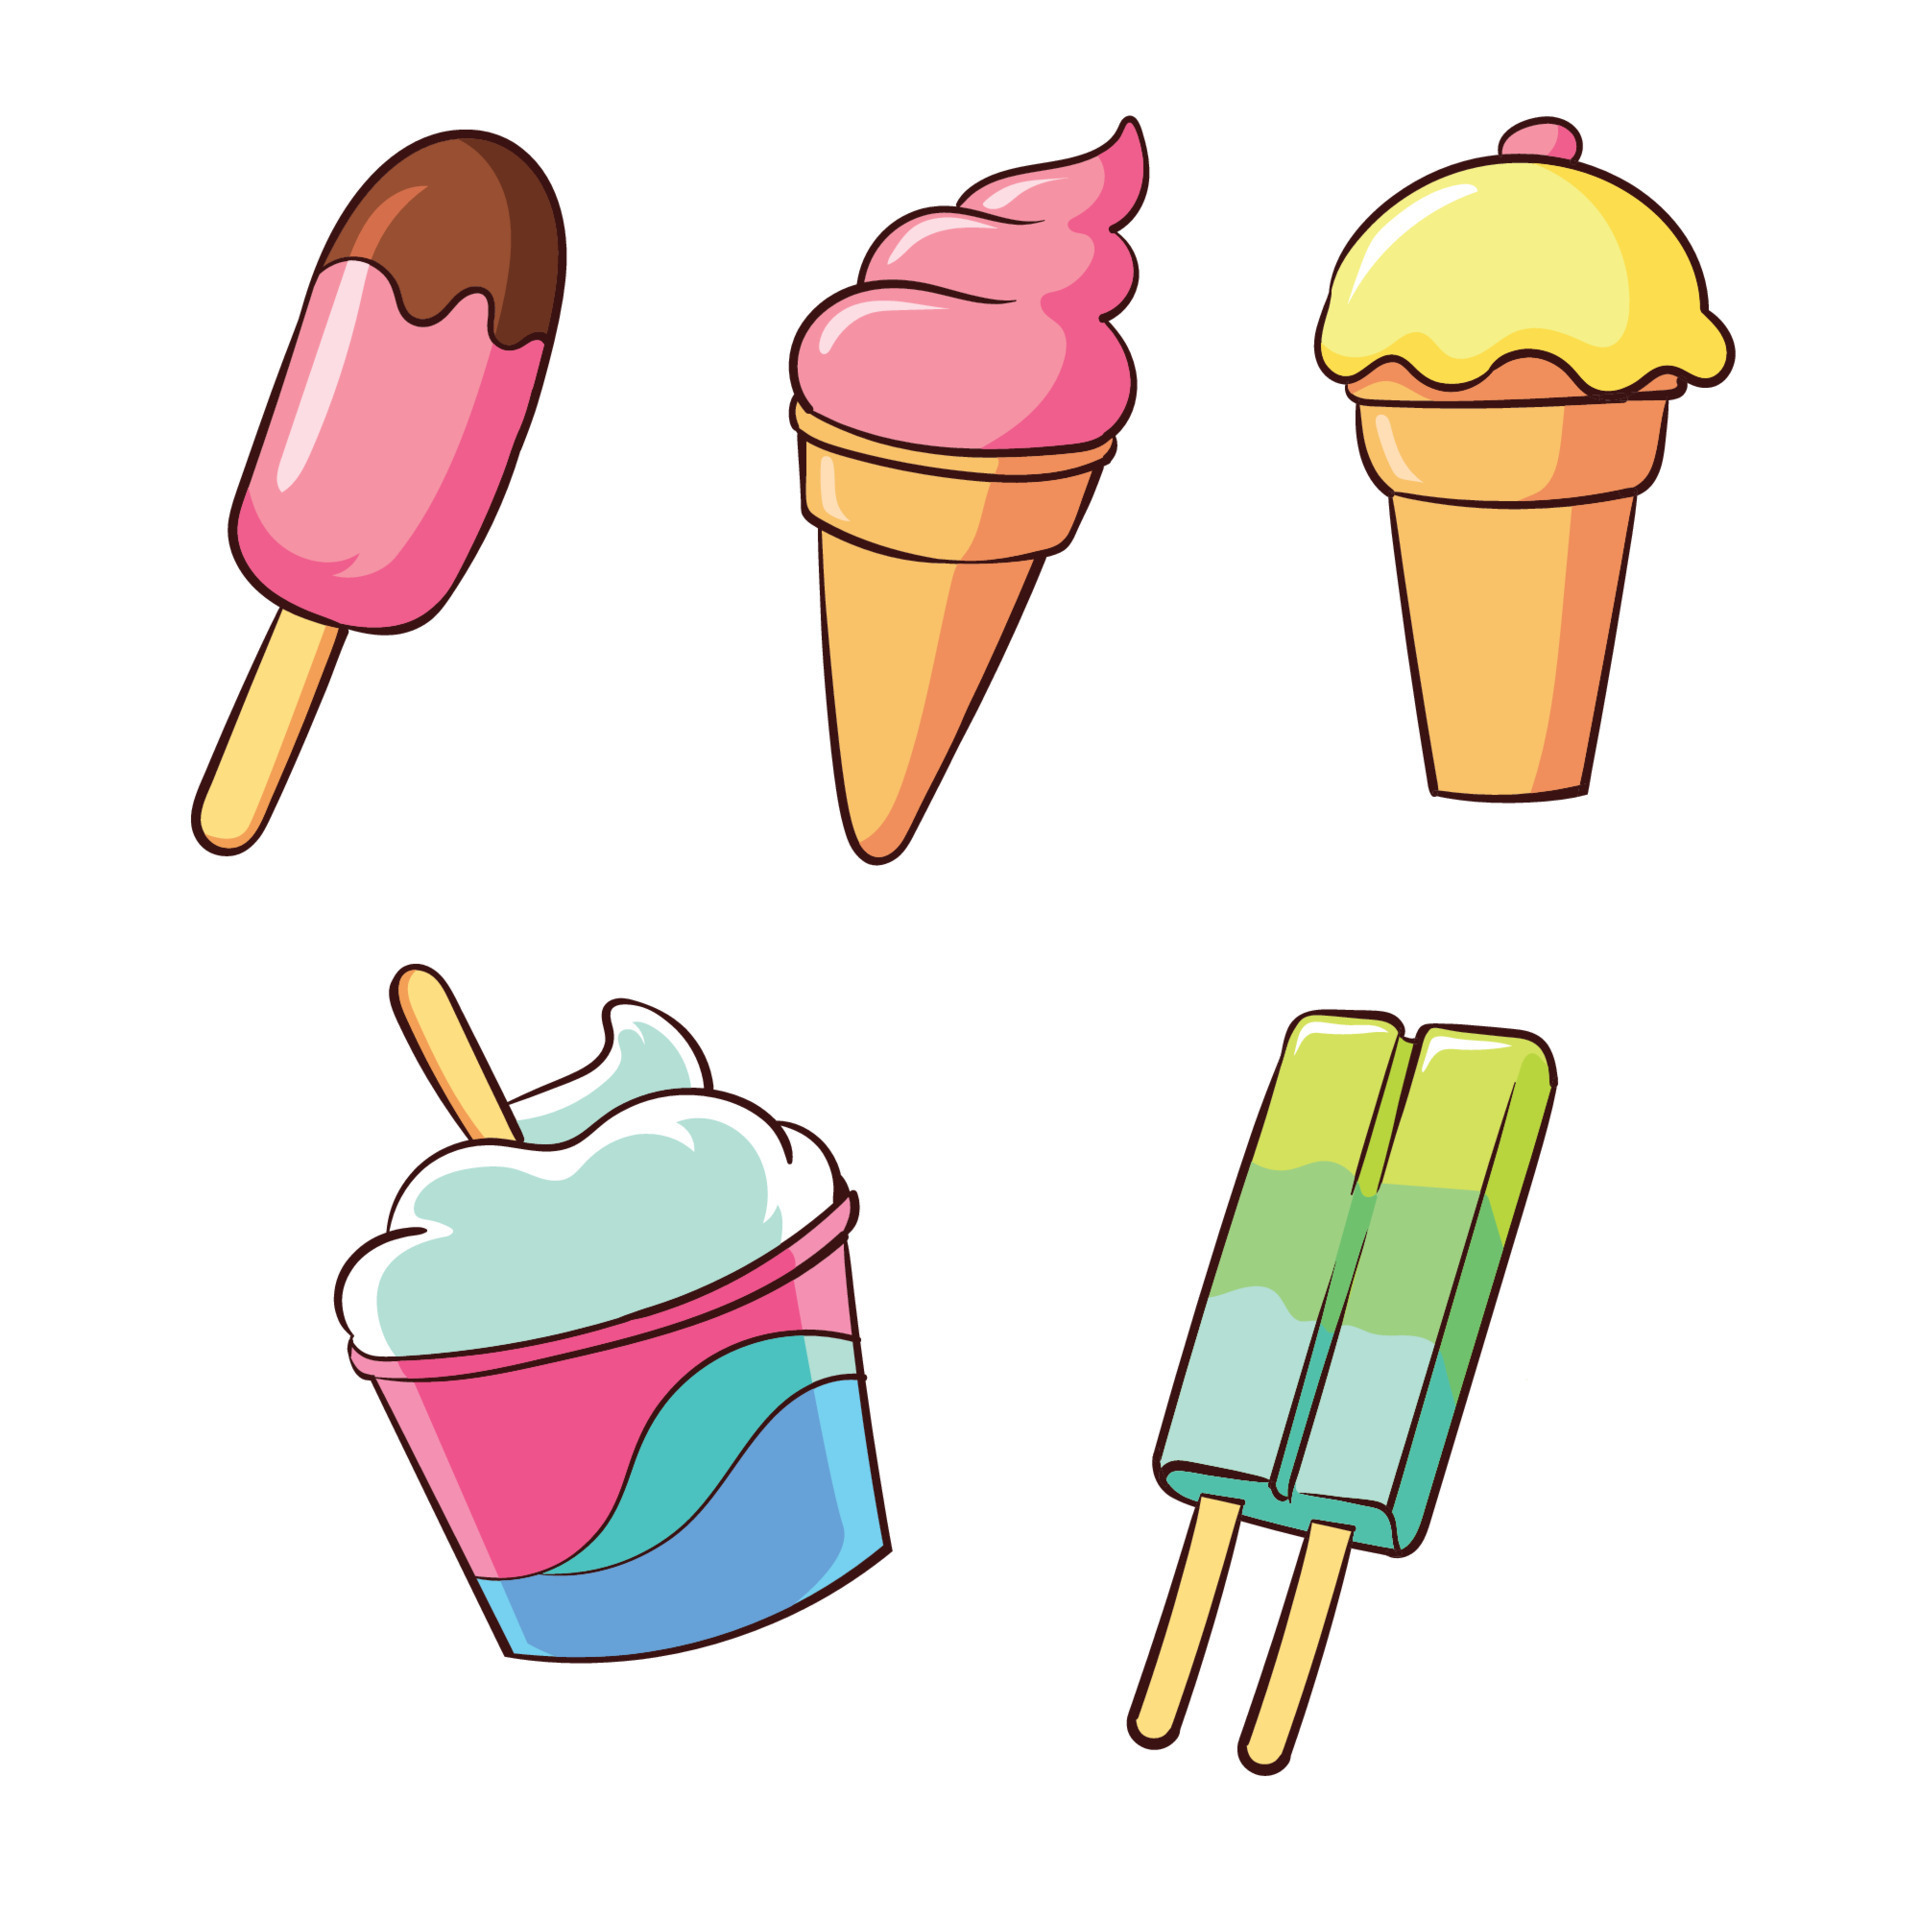 https://static.vecteezy.com/system/resources/previews/007/949/322/original/different-types-of-ice-cream-free-vector.jpg